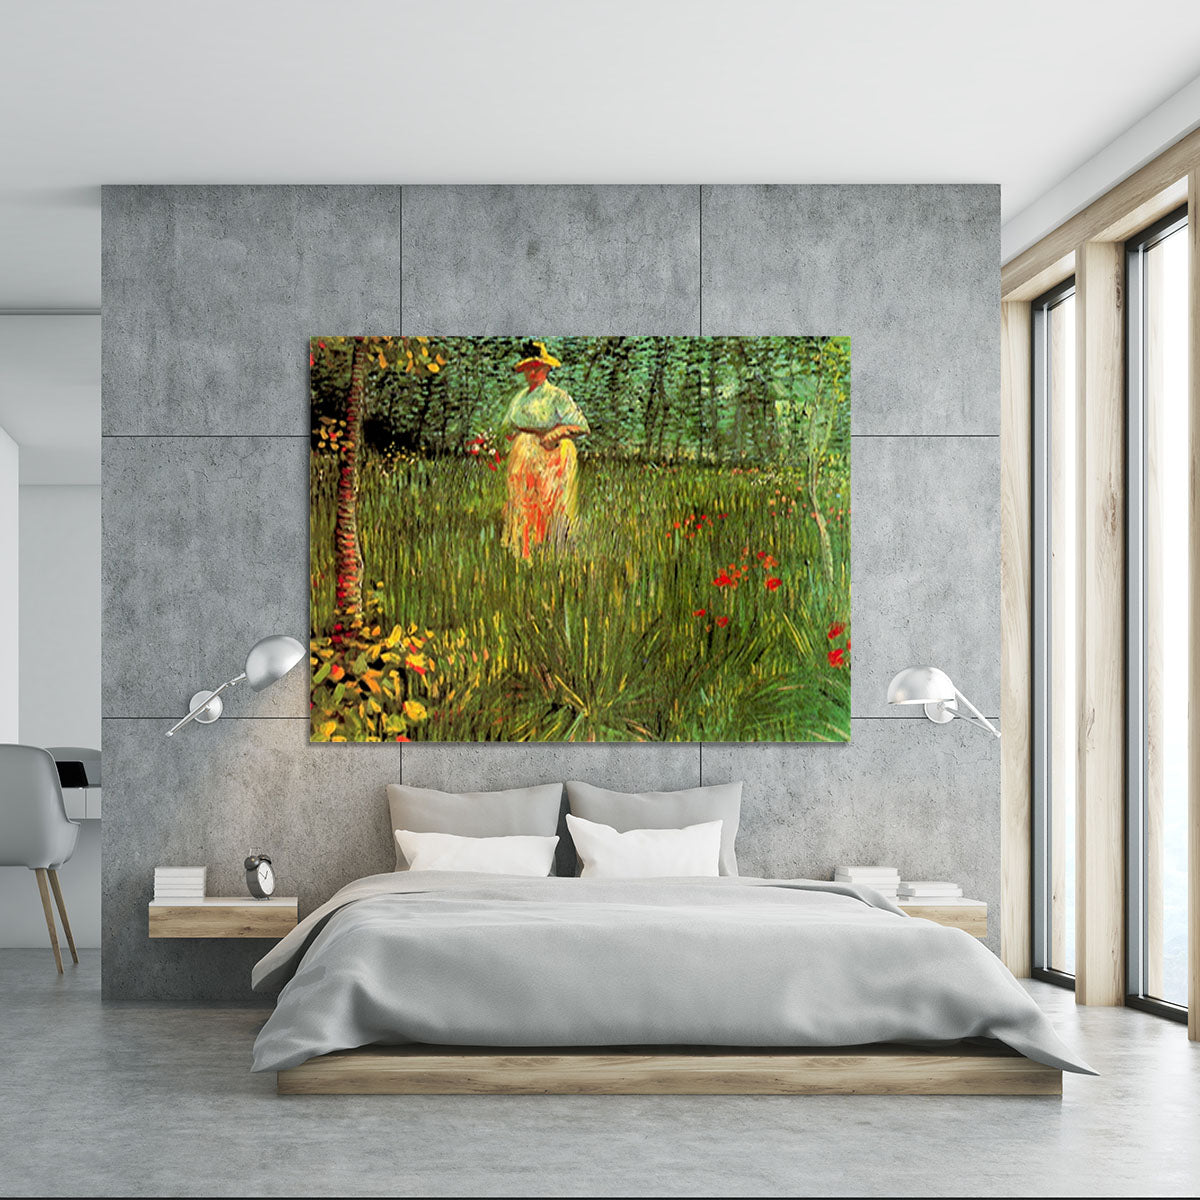 A Woman Walking in a Garden by Van Gogh Canvas Print or Poster - Canvas Art Rocks - 5